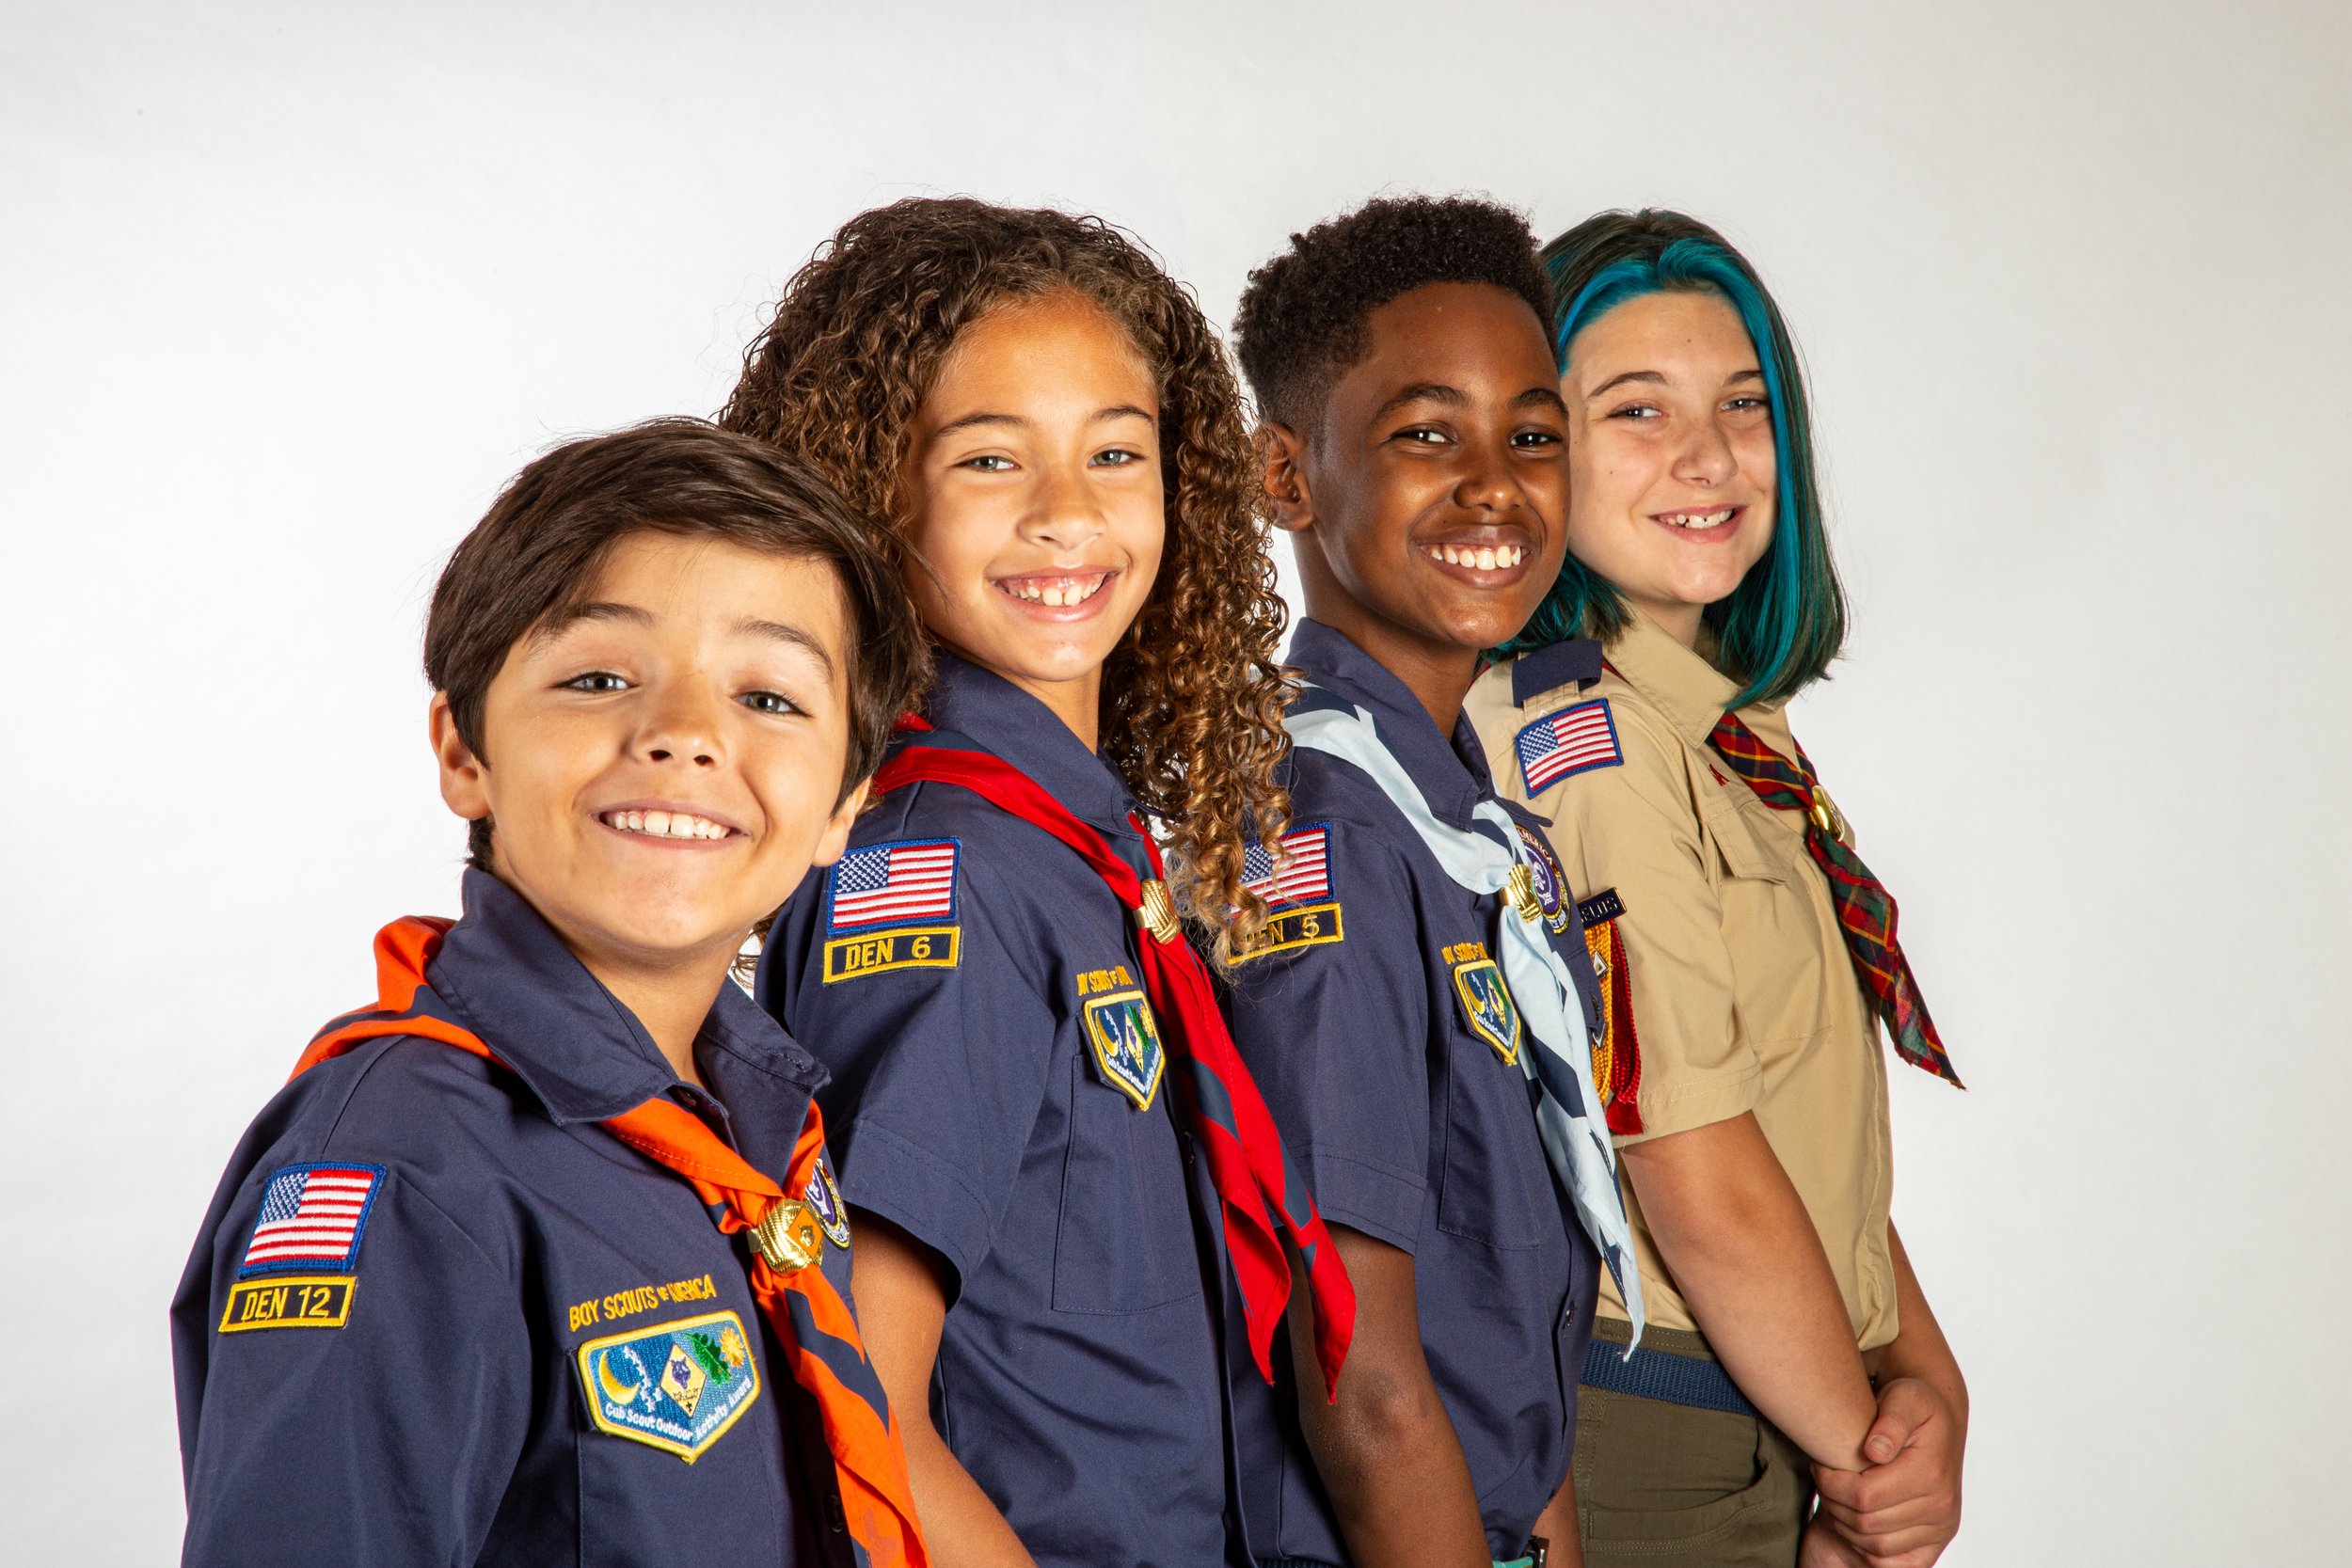 Why the Boy Scouts Work